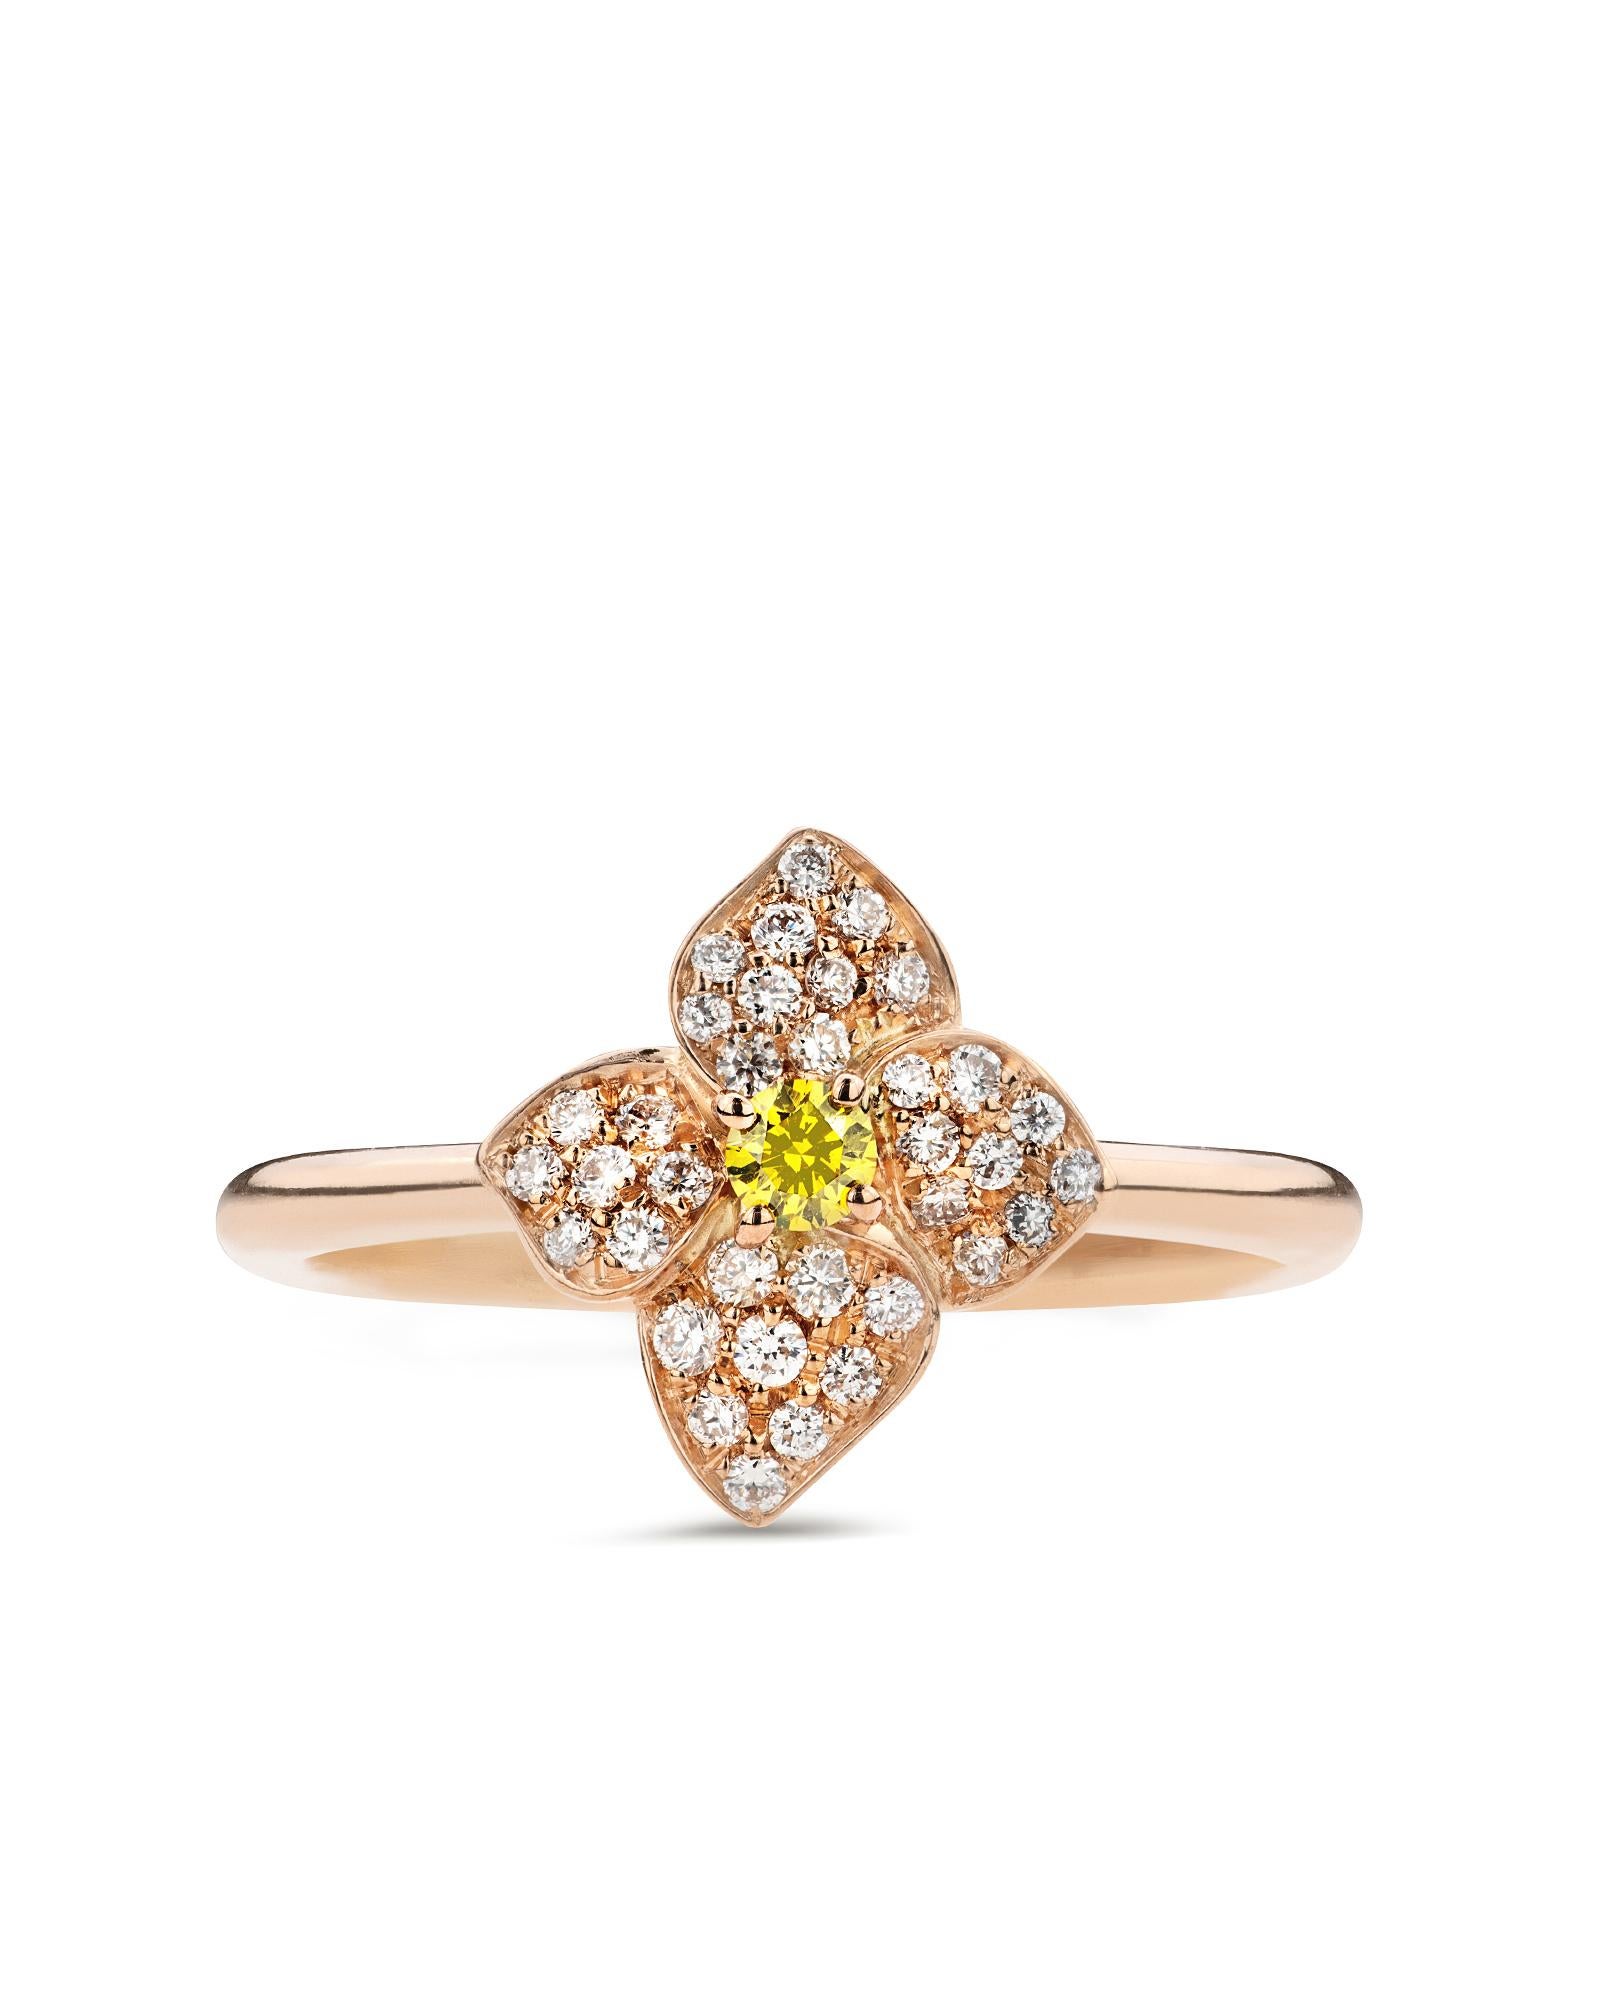 The simplicity and elegance of this ring are inspired by the floral motifs of Hortense.. The central flower is decorated with diamonds and embellished with a yellow fancy diamond that gives shine to the jewel.

Characteristics:
• 18 carat rose